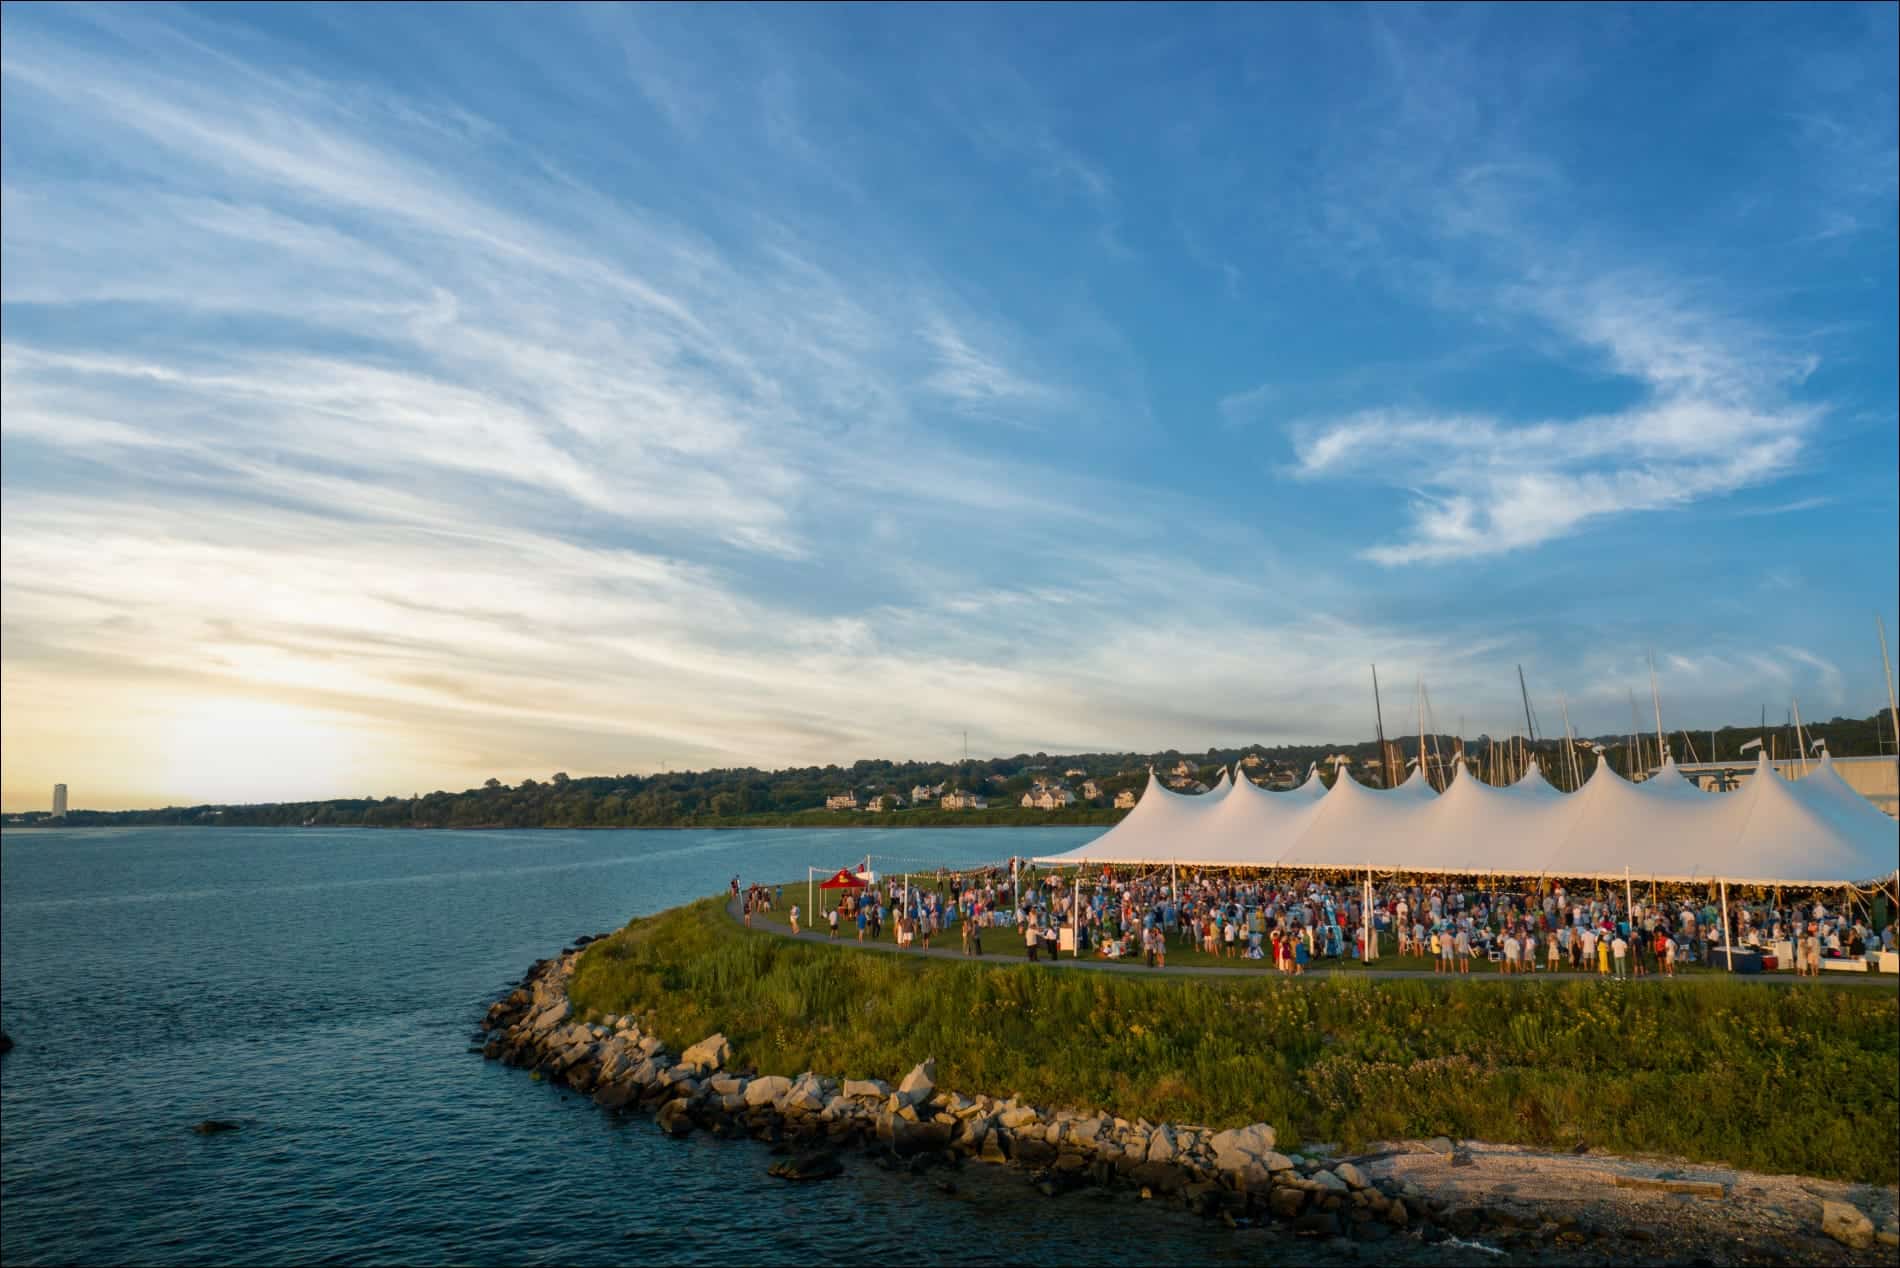 large crowd under a tent by the water at sunset